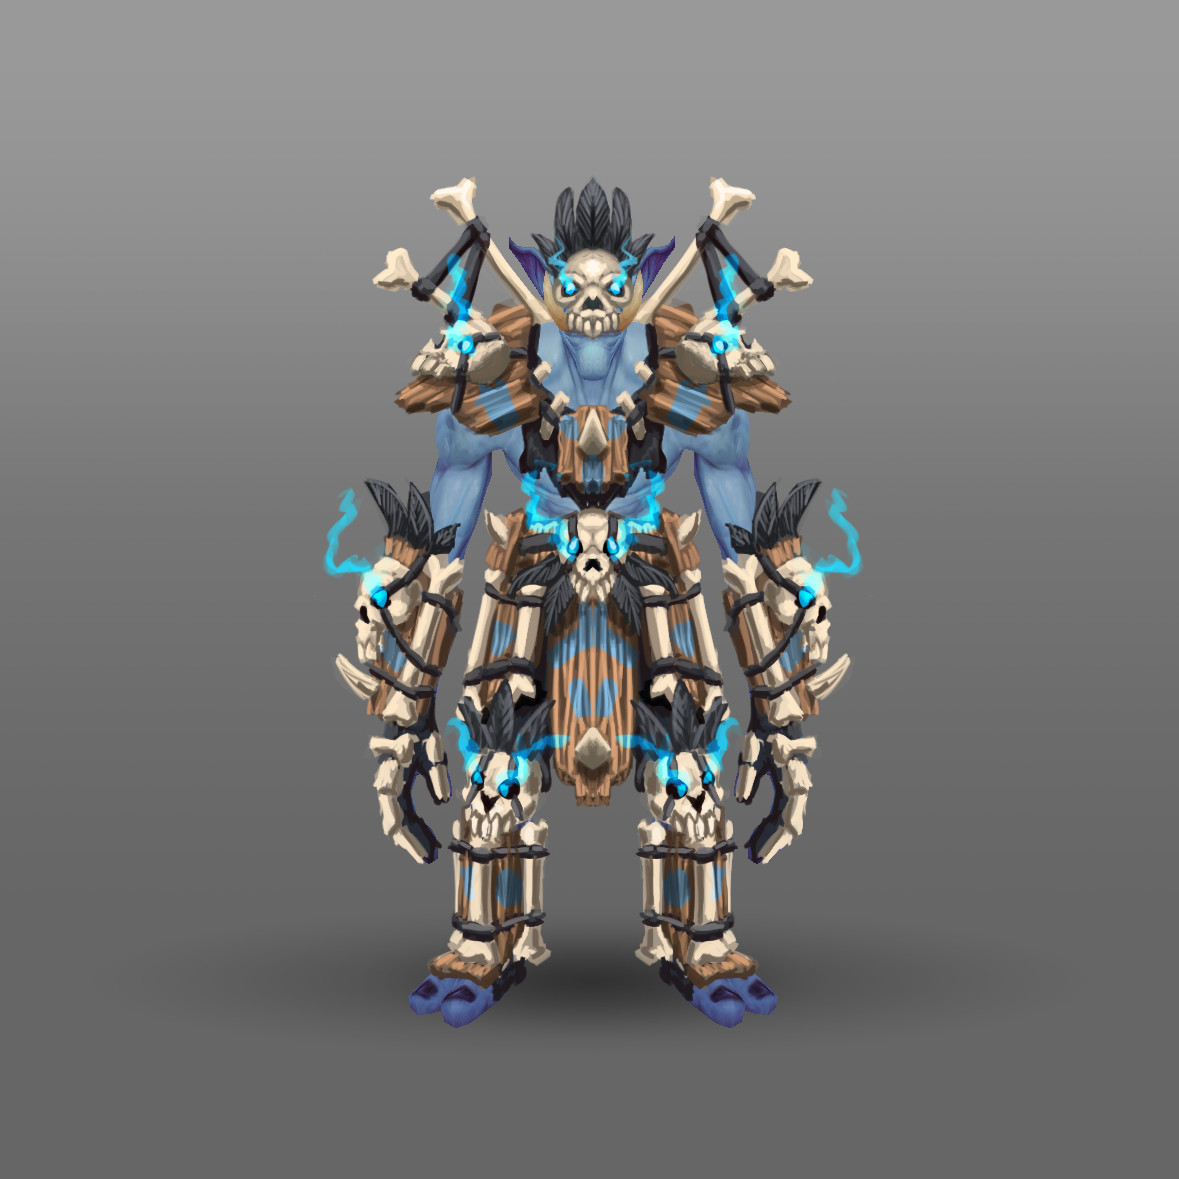 Deathknight
The Darkspear introduced as to Bwonsamdi during Zalazane's Fall, so it felt just right to have this set based on the Loa of Death.